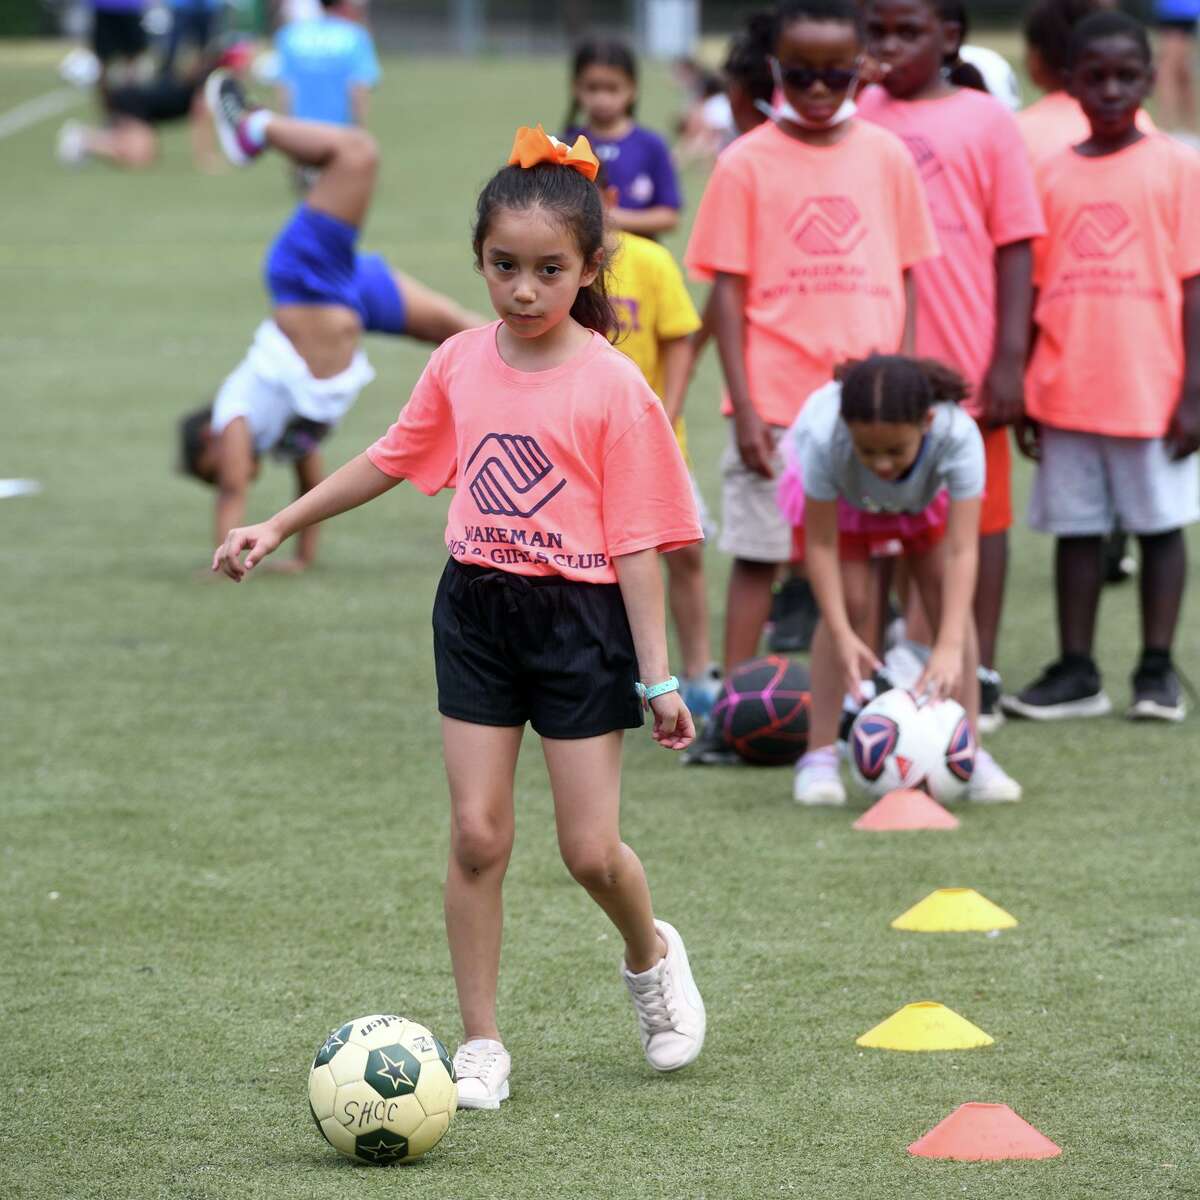 A girl dribbles a soccer ball during a health, wellness and soccer day camp at Wakeman Boys & Girls Club, in Fairfield, Conn. July 14, 2022.